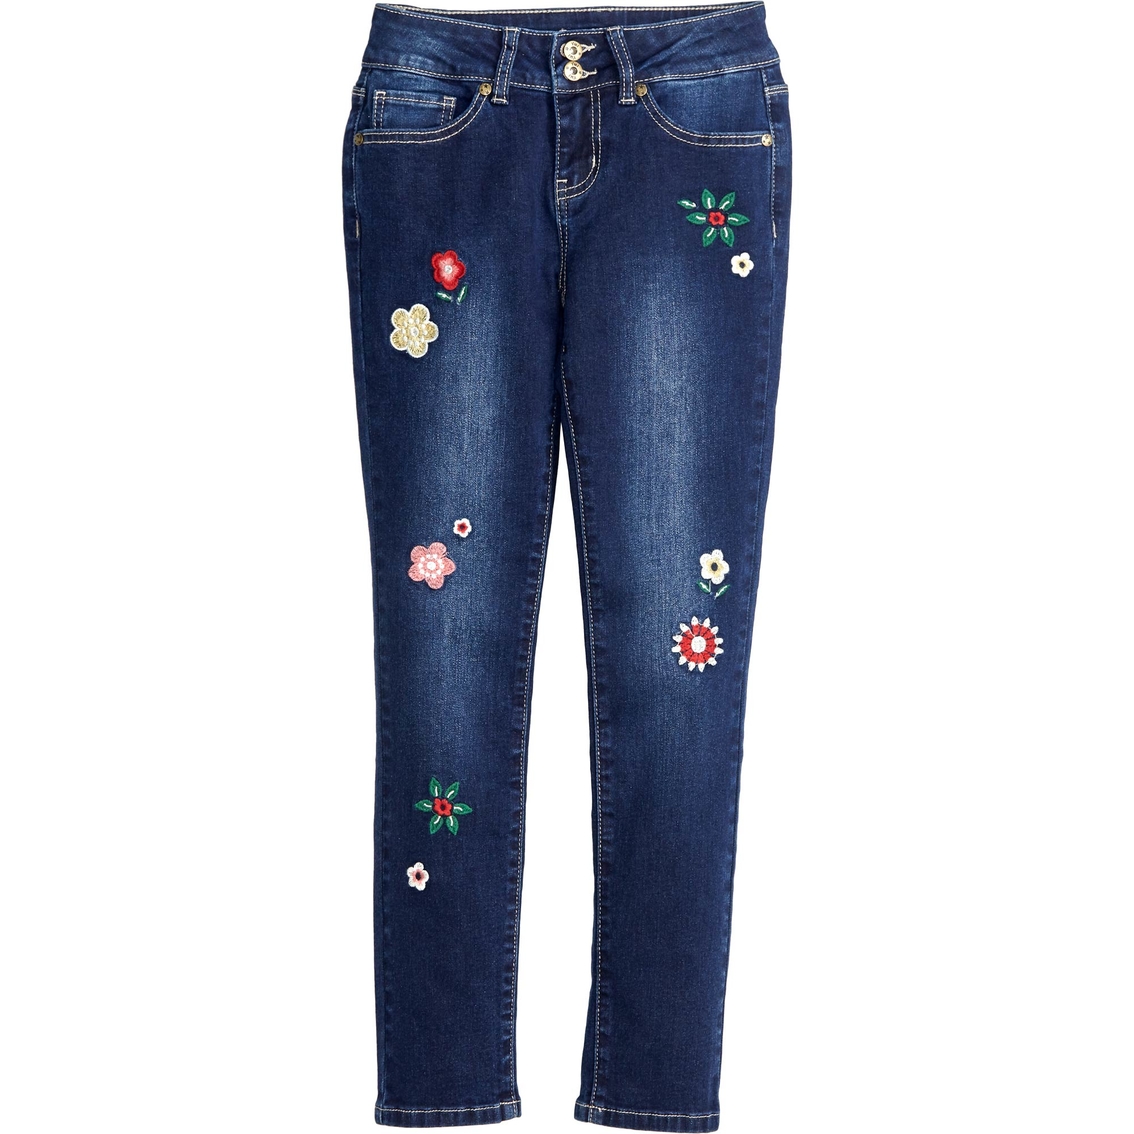 Ymi Girls Floral Embroidered 2 Button Skinny Jeans | Girls 7-16 ...